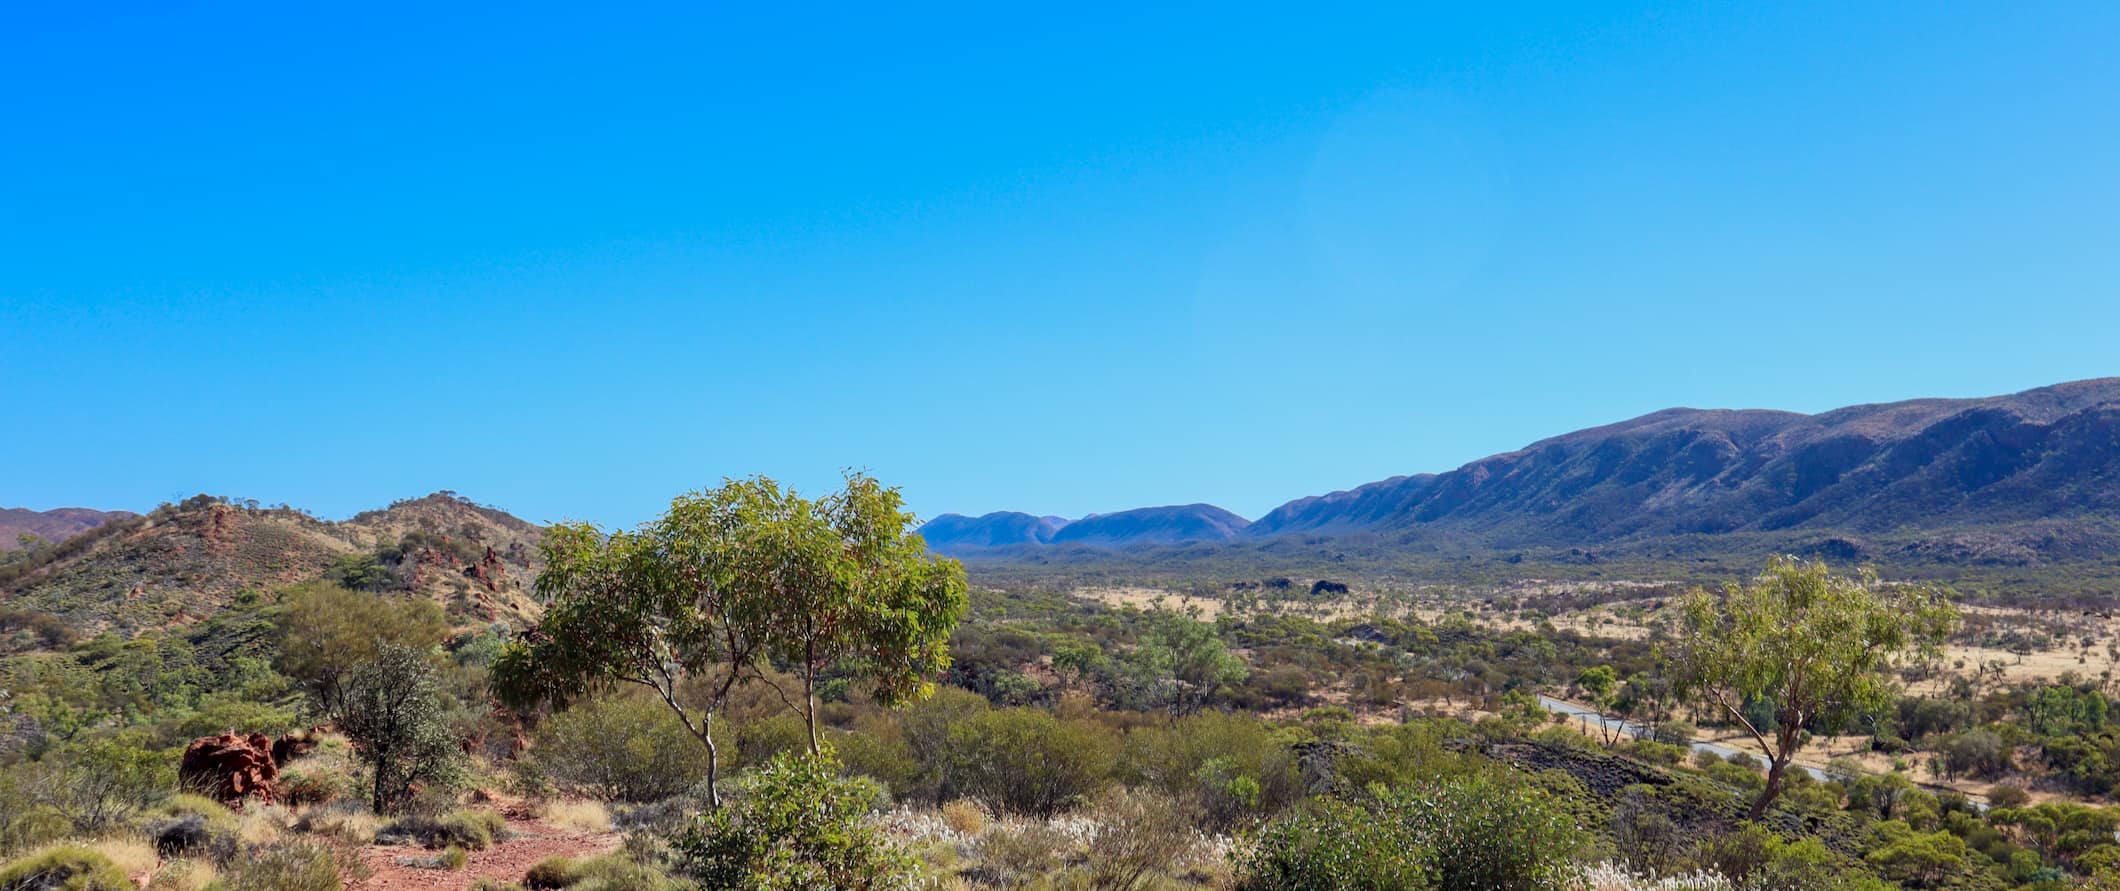 The sweeping MacDonnell Ranges near Alice Springs, Australia